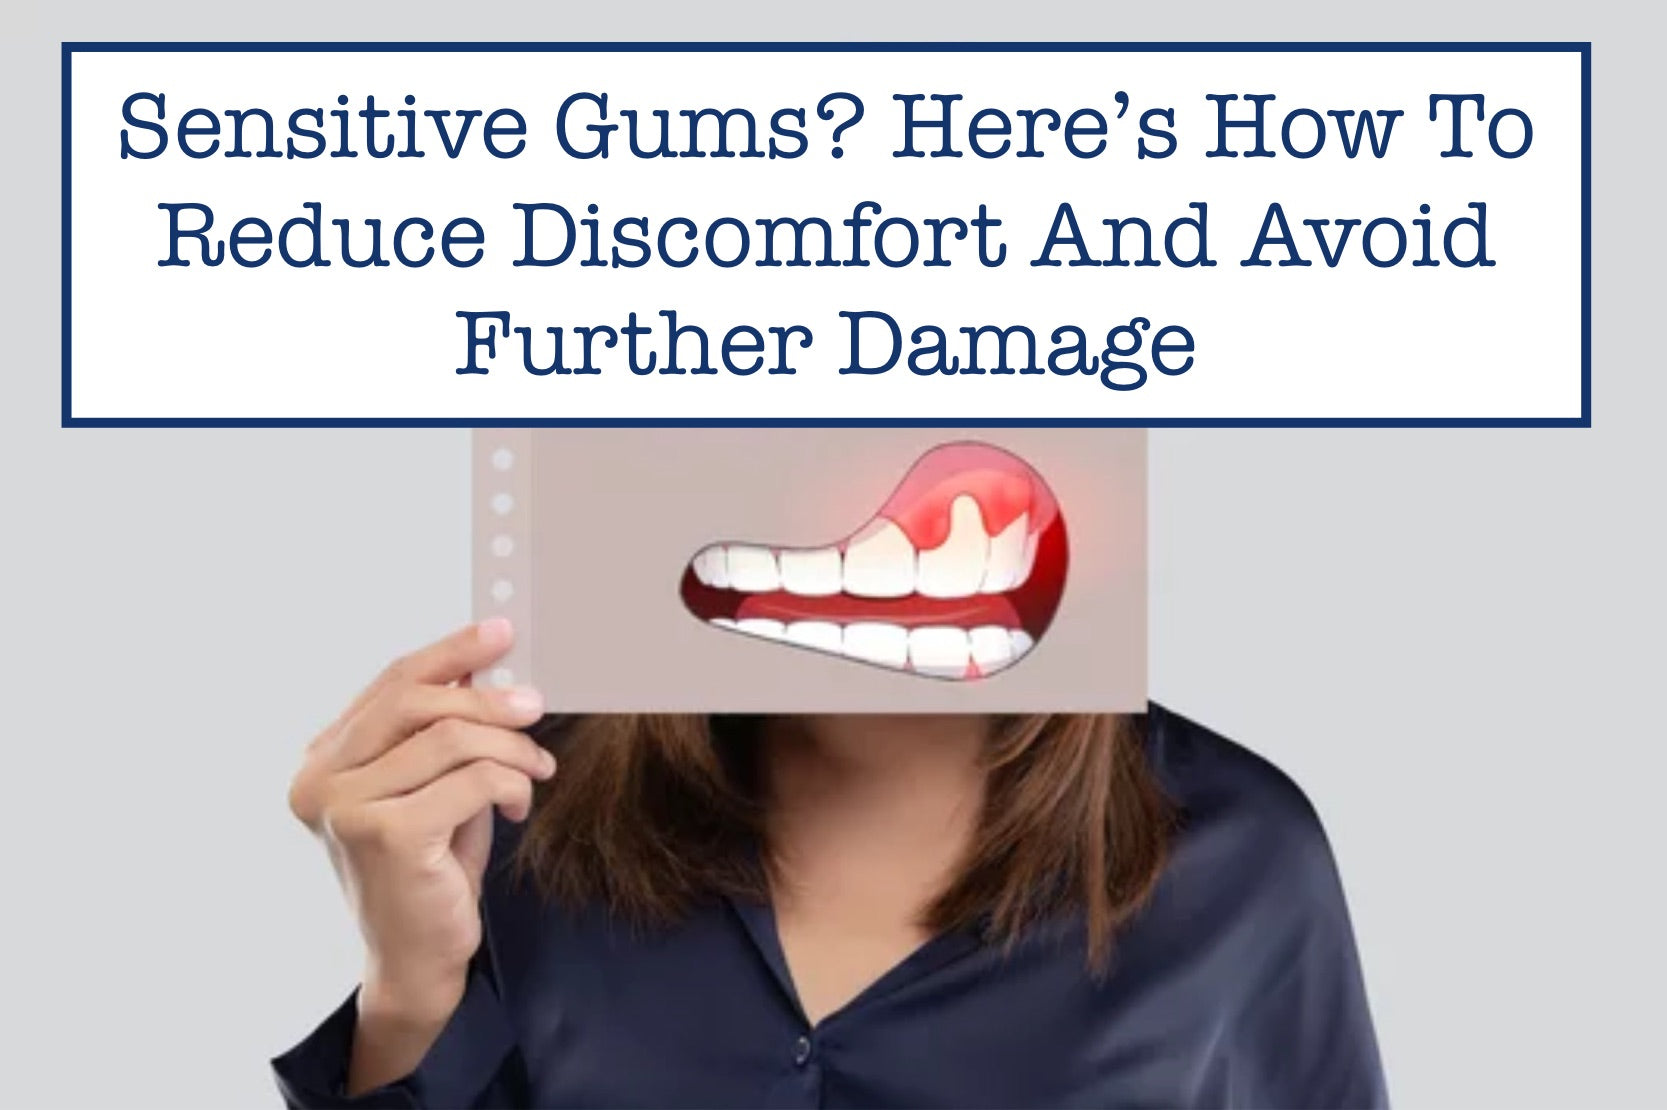 Sensitive Gums? Here’s How To Reduce Discomfort And Avoid Further Damage